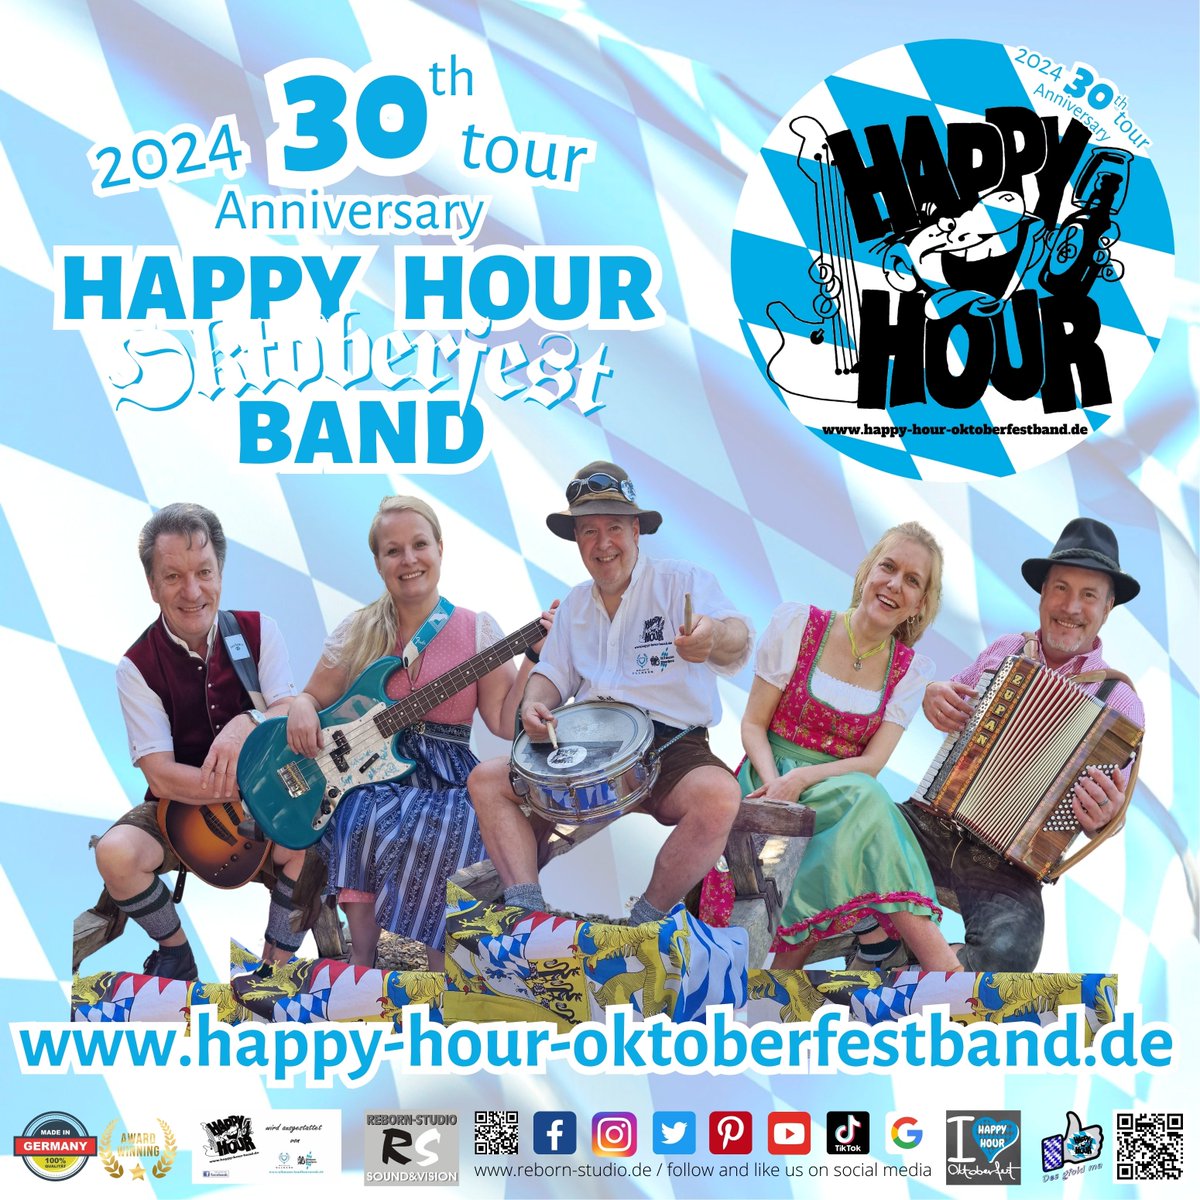 HAPPY HOUR OKTOBERFESTBAND - 30th Anniversary tour 2024 - Check out our upcoming tourdates and updates on happy-hour-oktoberfestband.de and don't forget to book YOUR Oktoberfest NOW: booking@happy-hour-oktoberfestband.de